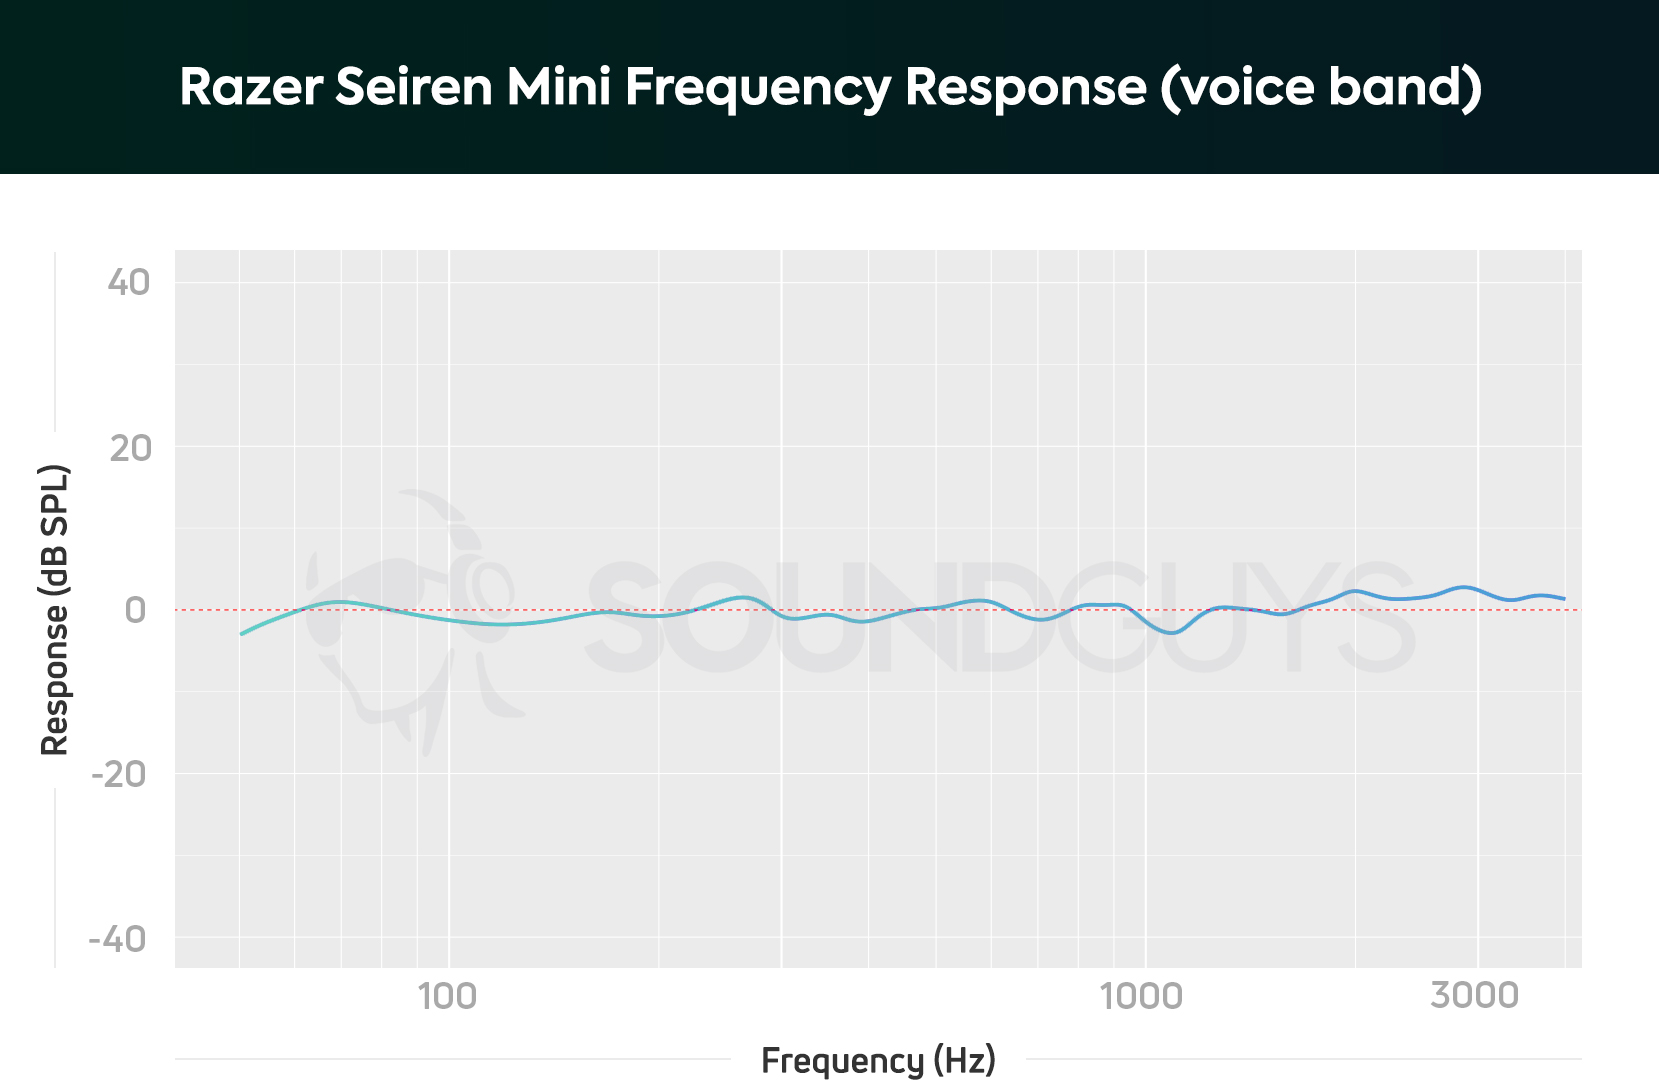 A chart shows the Razer Seiren Mini microphone frequency response compared to the platonic ideal (red dotted line).